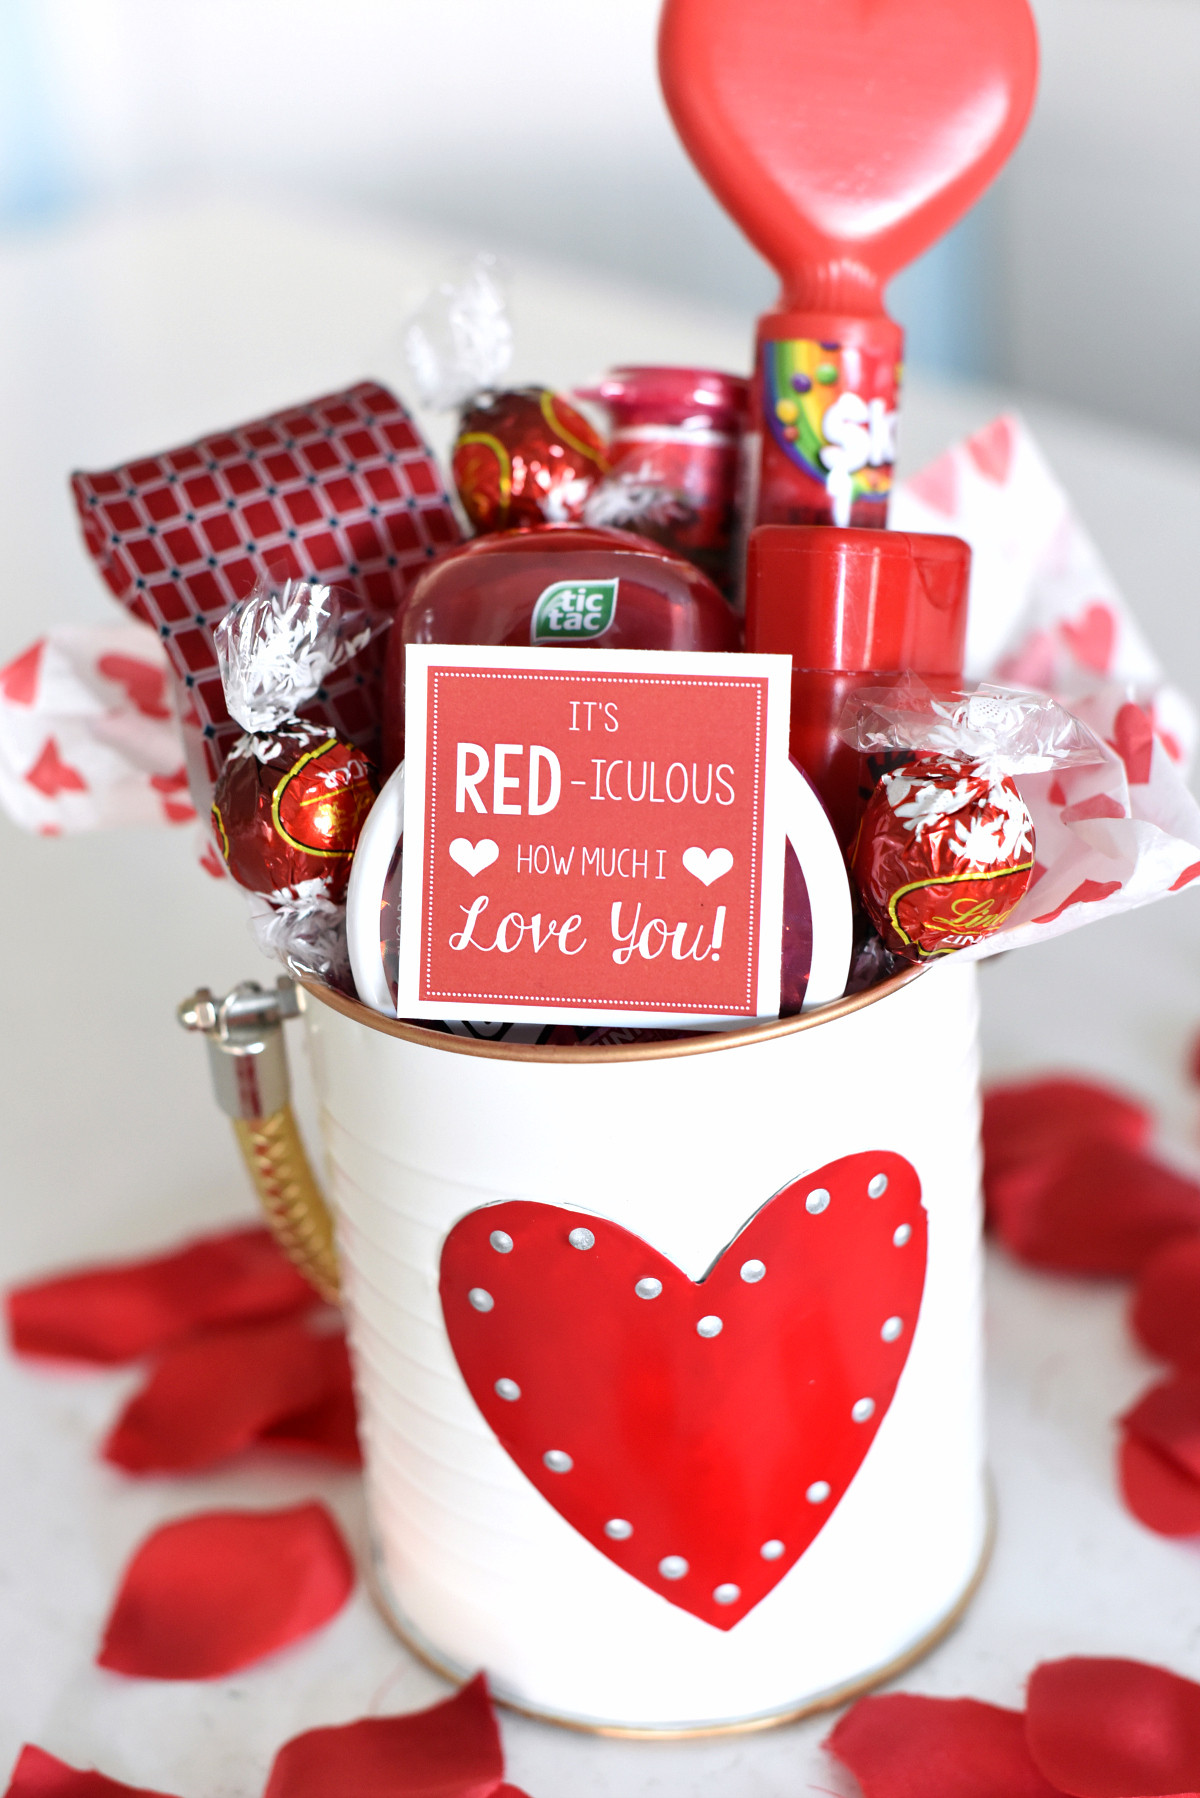 Cute Valentines Day Gifts
 Cute Valentine s Day Gift Idea RED iculous Basket